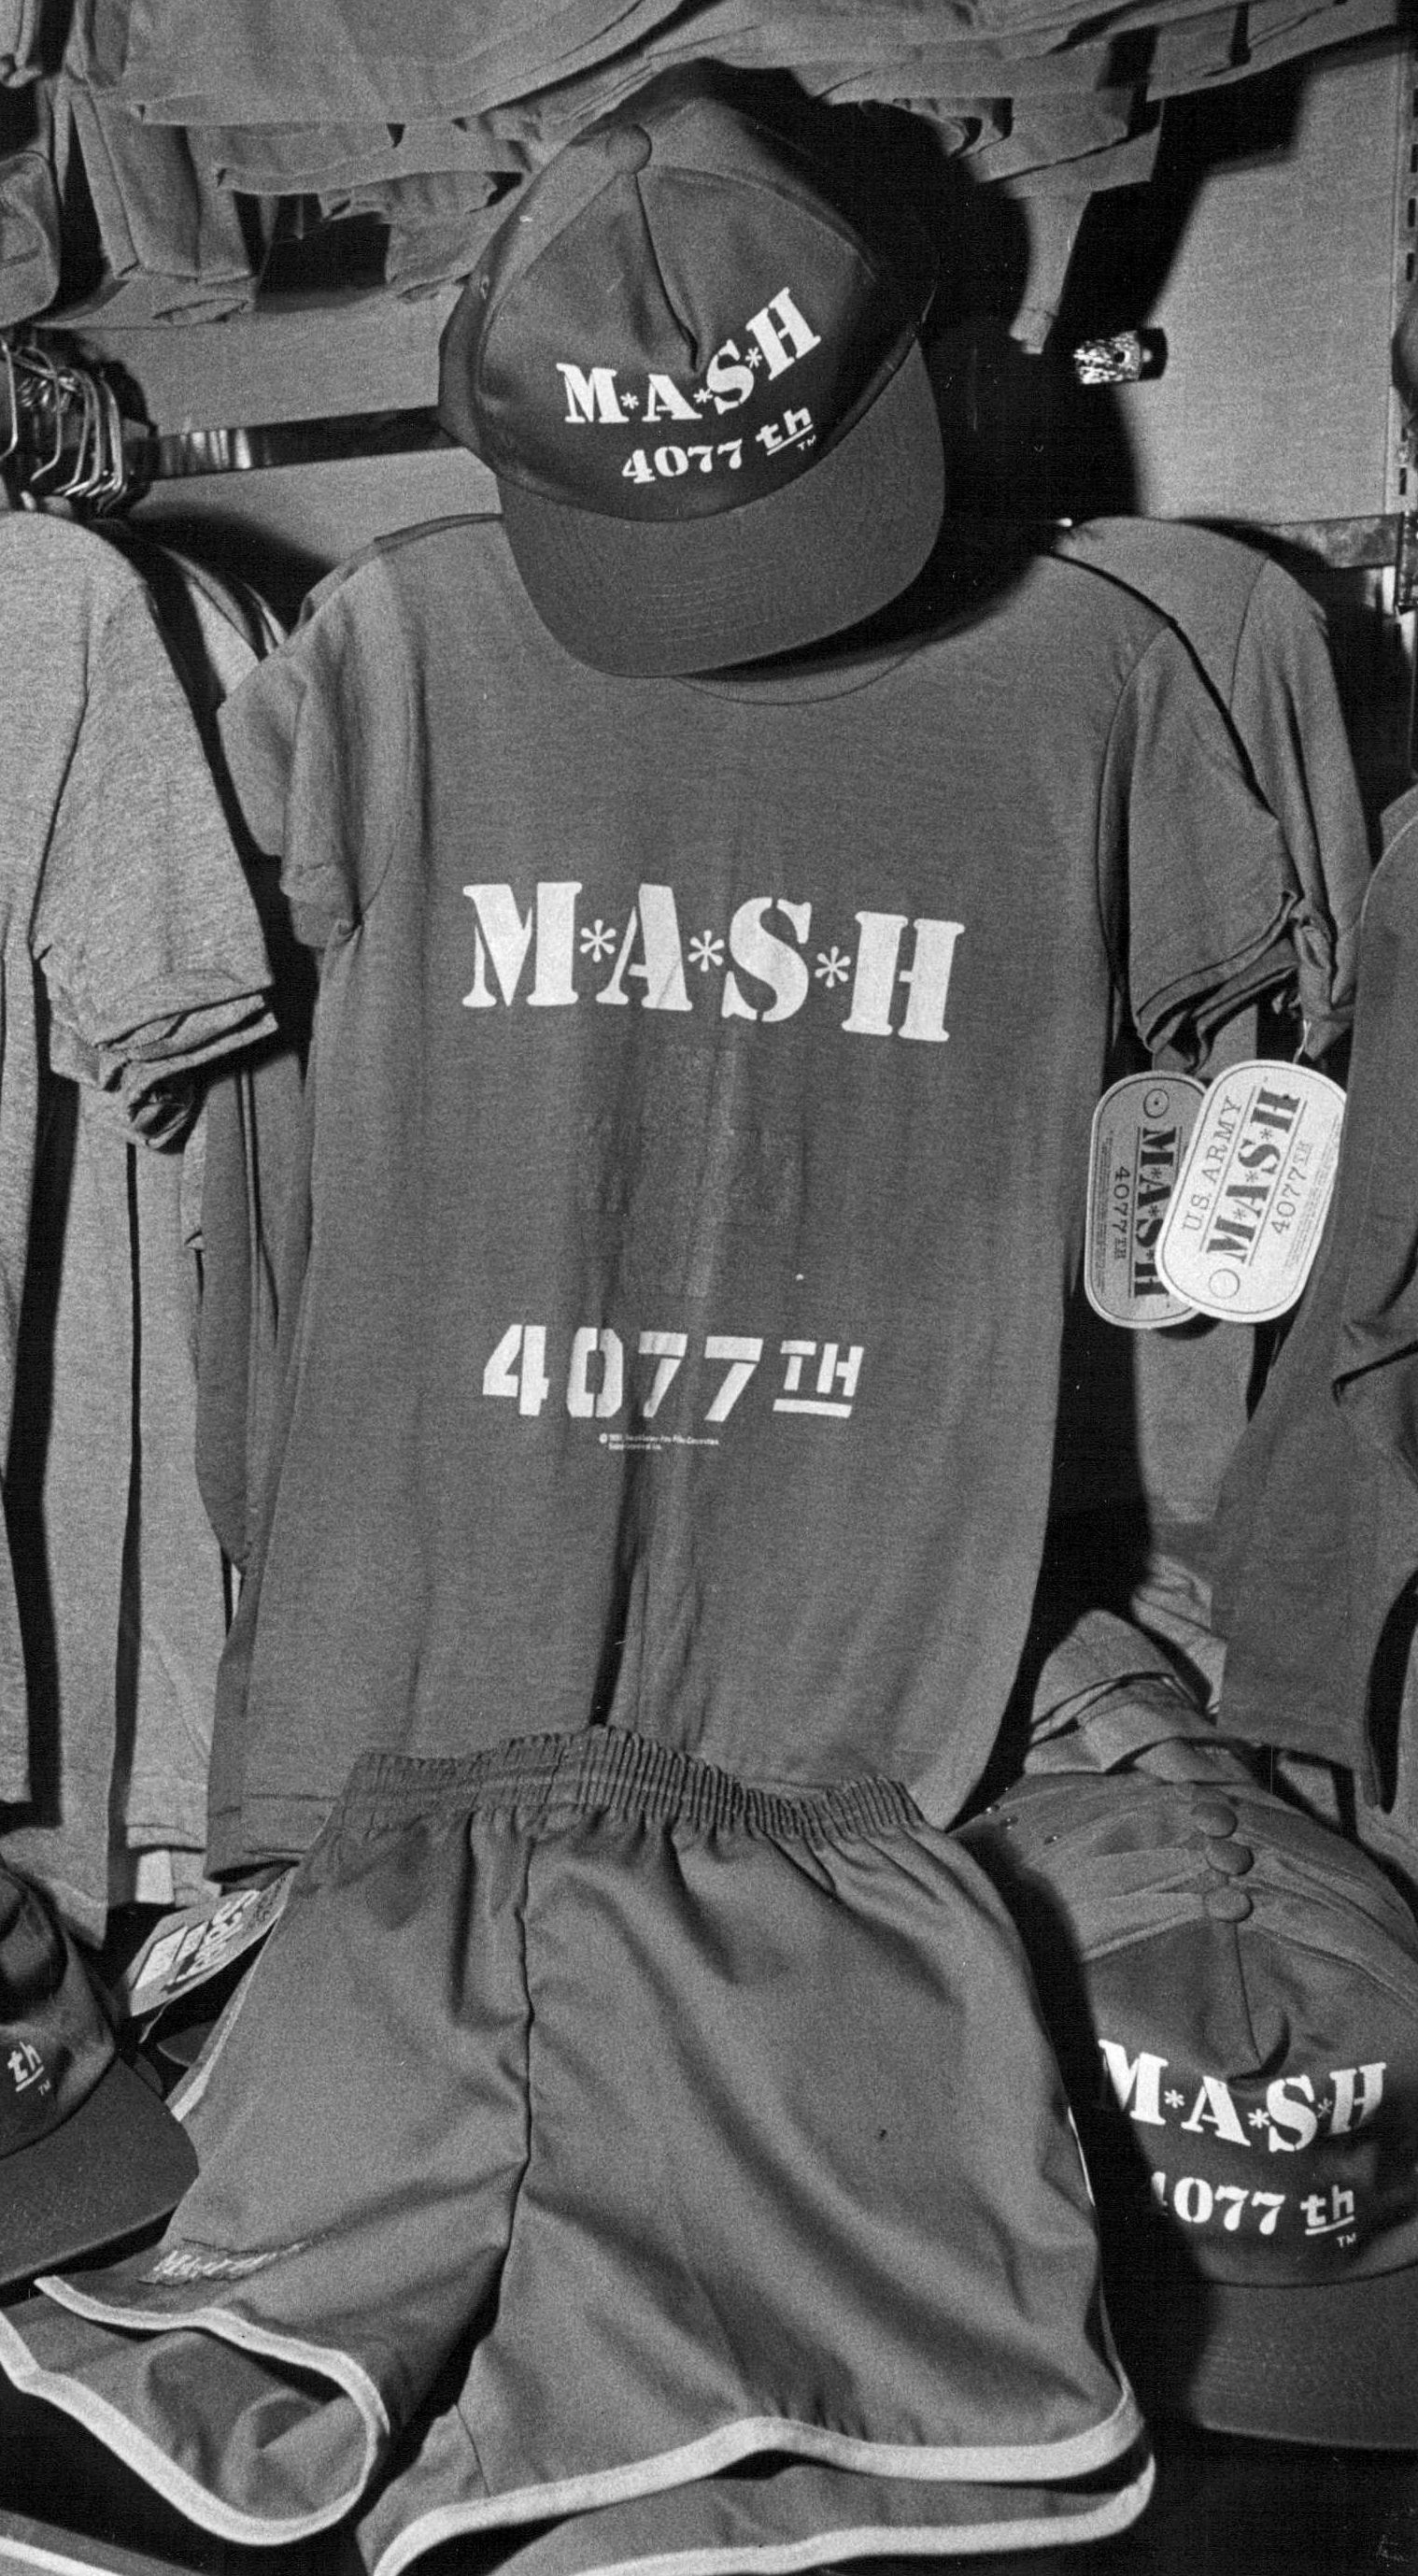  M*A*S*H ensemble - cap ($7.99), T-shirt ($7.99), and shorts ($4.97). All at Spencer's Gifts of Buckingham, Buckingham Square. Credit: The Denver Post. | Source: Getty Images